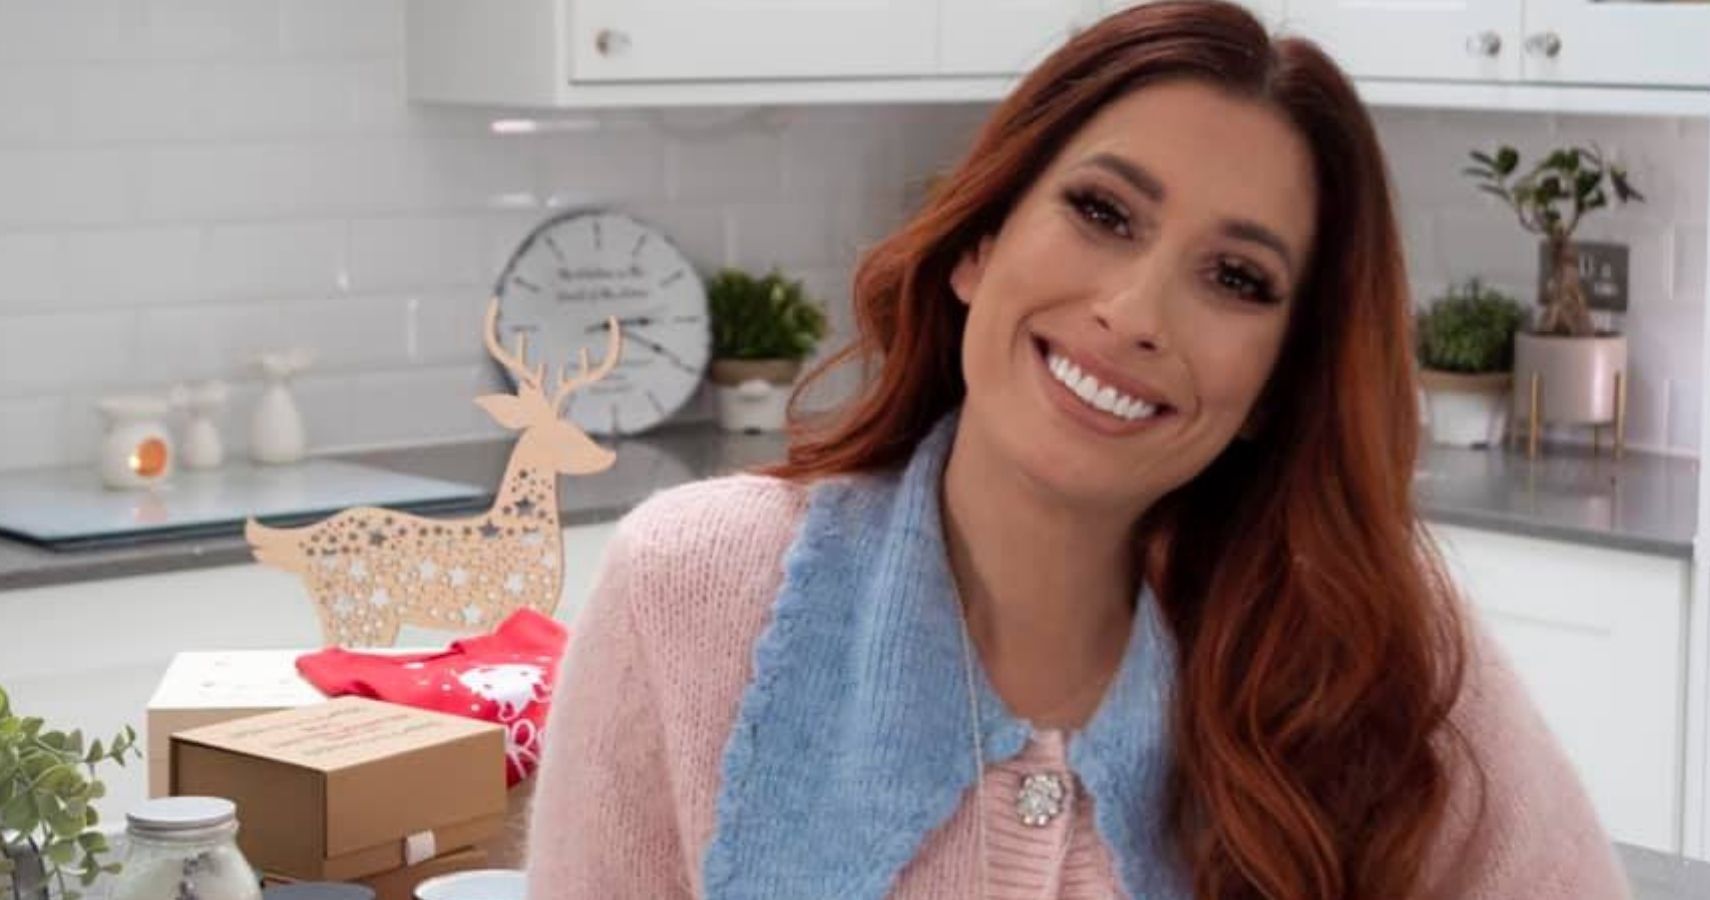 Stacey Solomon Lost Many Teeth While Pregnant: 'They Turned Black & Fell Out'